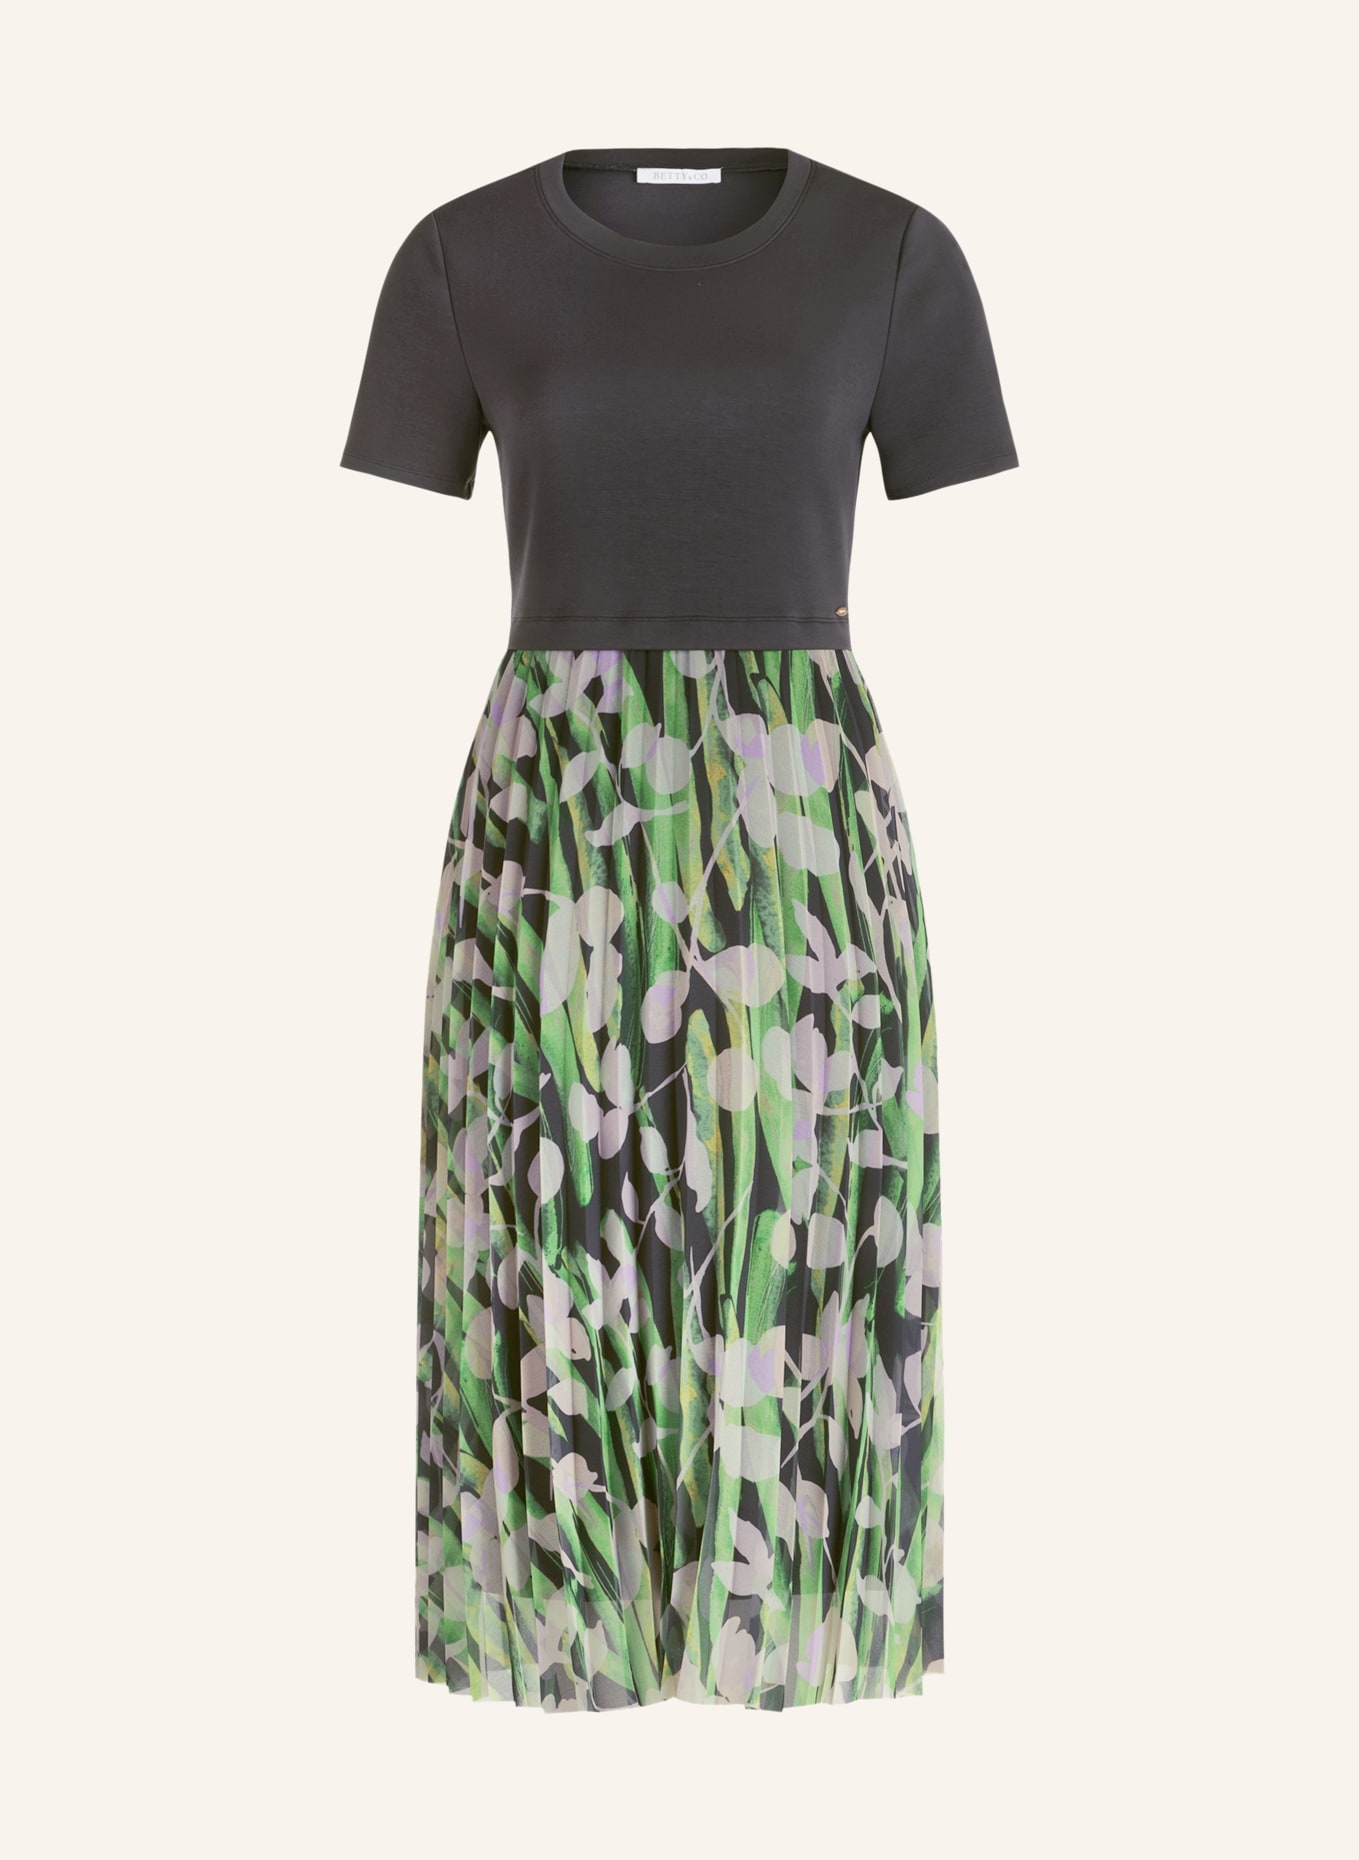 BETTY&CO Dress in mixed materials, Color: DARK GRAY/ GREEN/ PURPLE (Image 1)